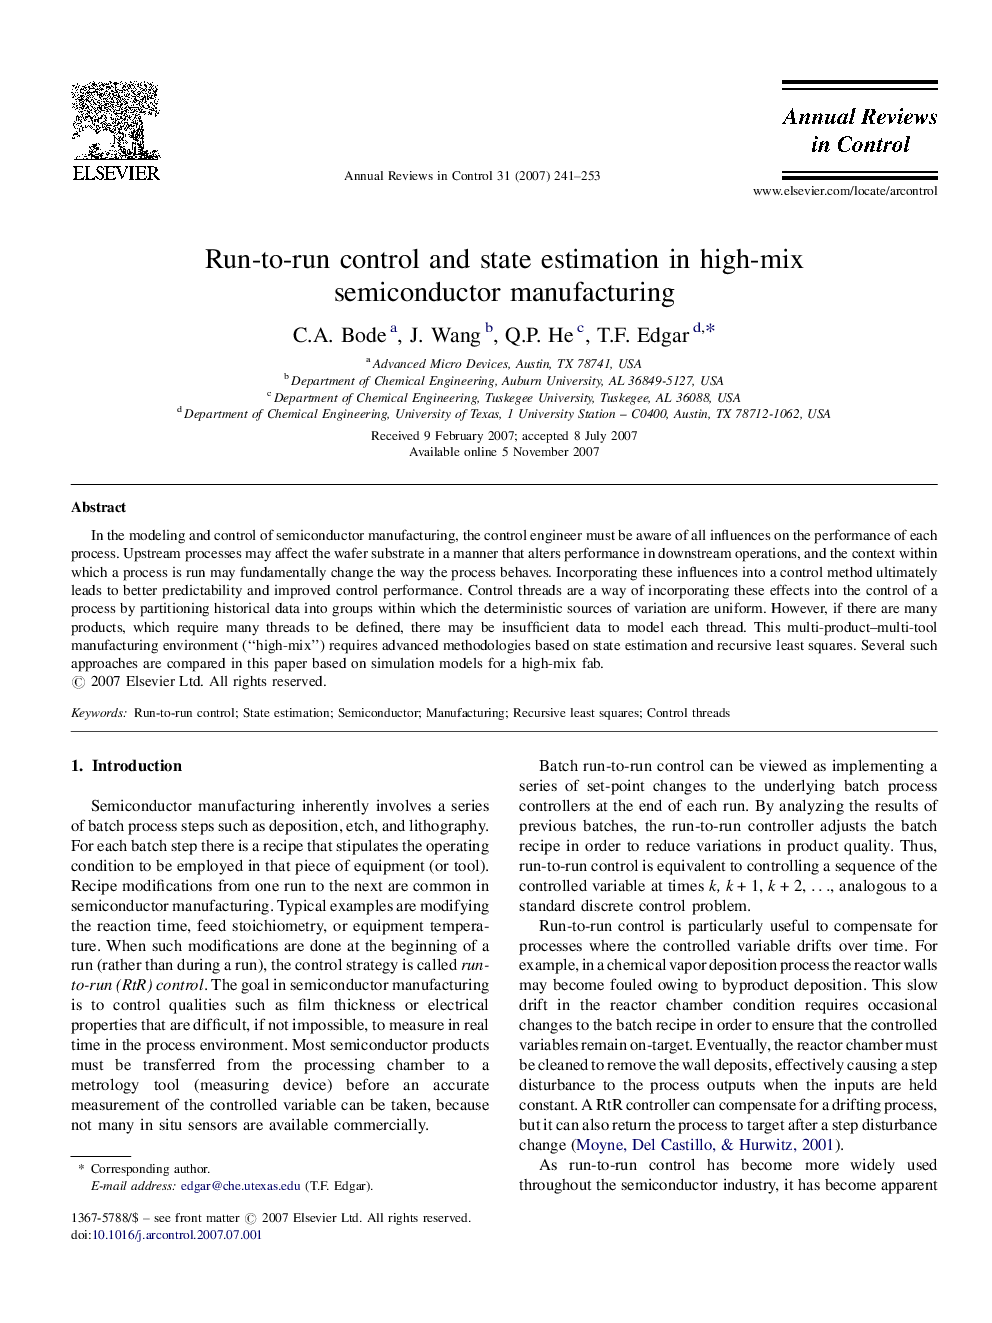 Run-to-run control and state estimation in high-mix semiconductor manufacturing